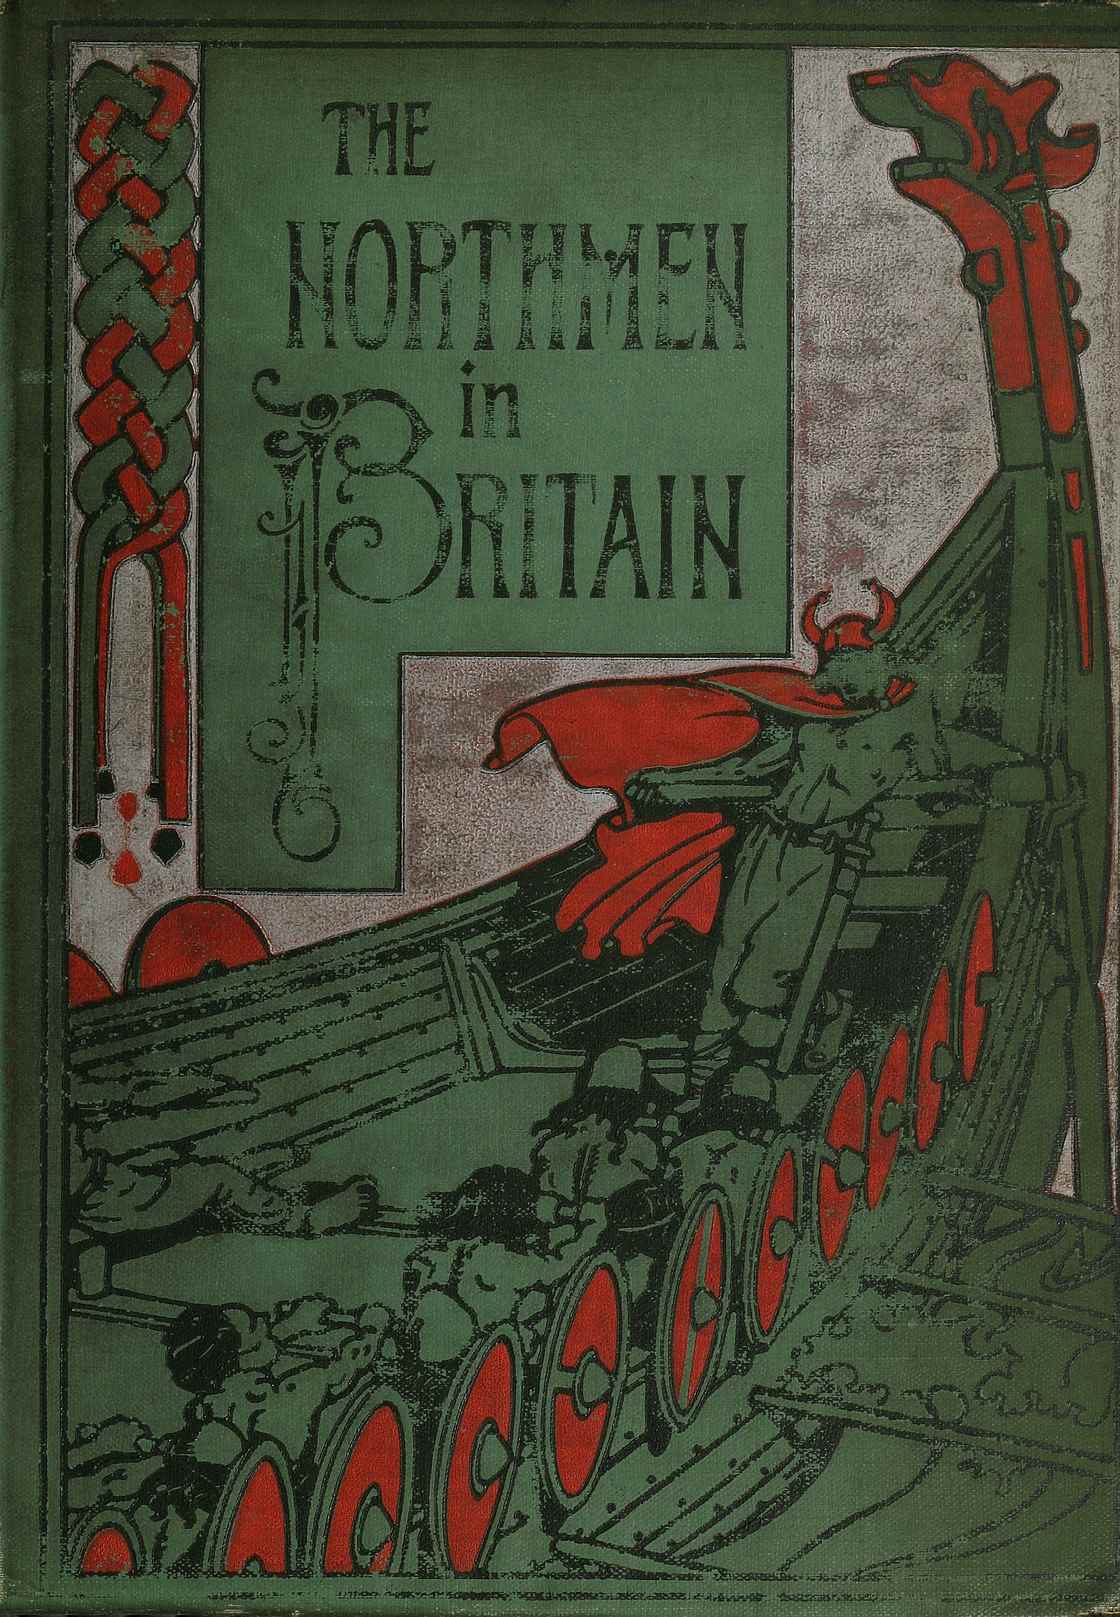 The Northmen In Britain, by Eleanor Hull—A Project Gutenberg eBook